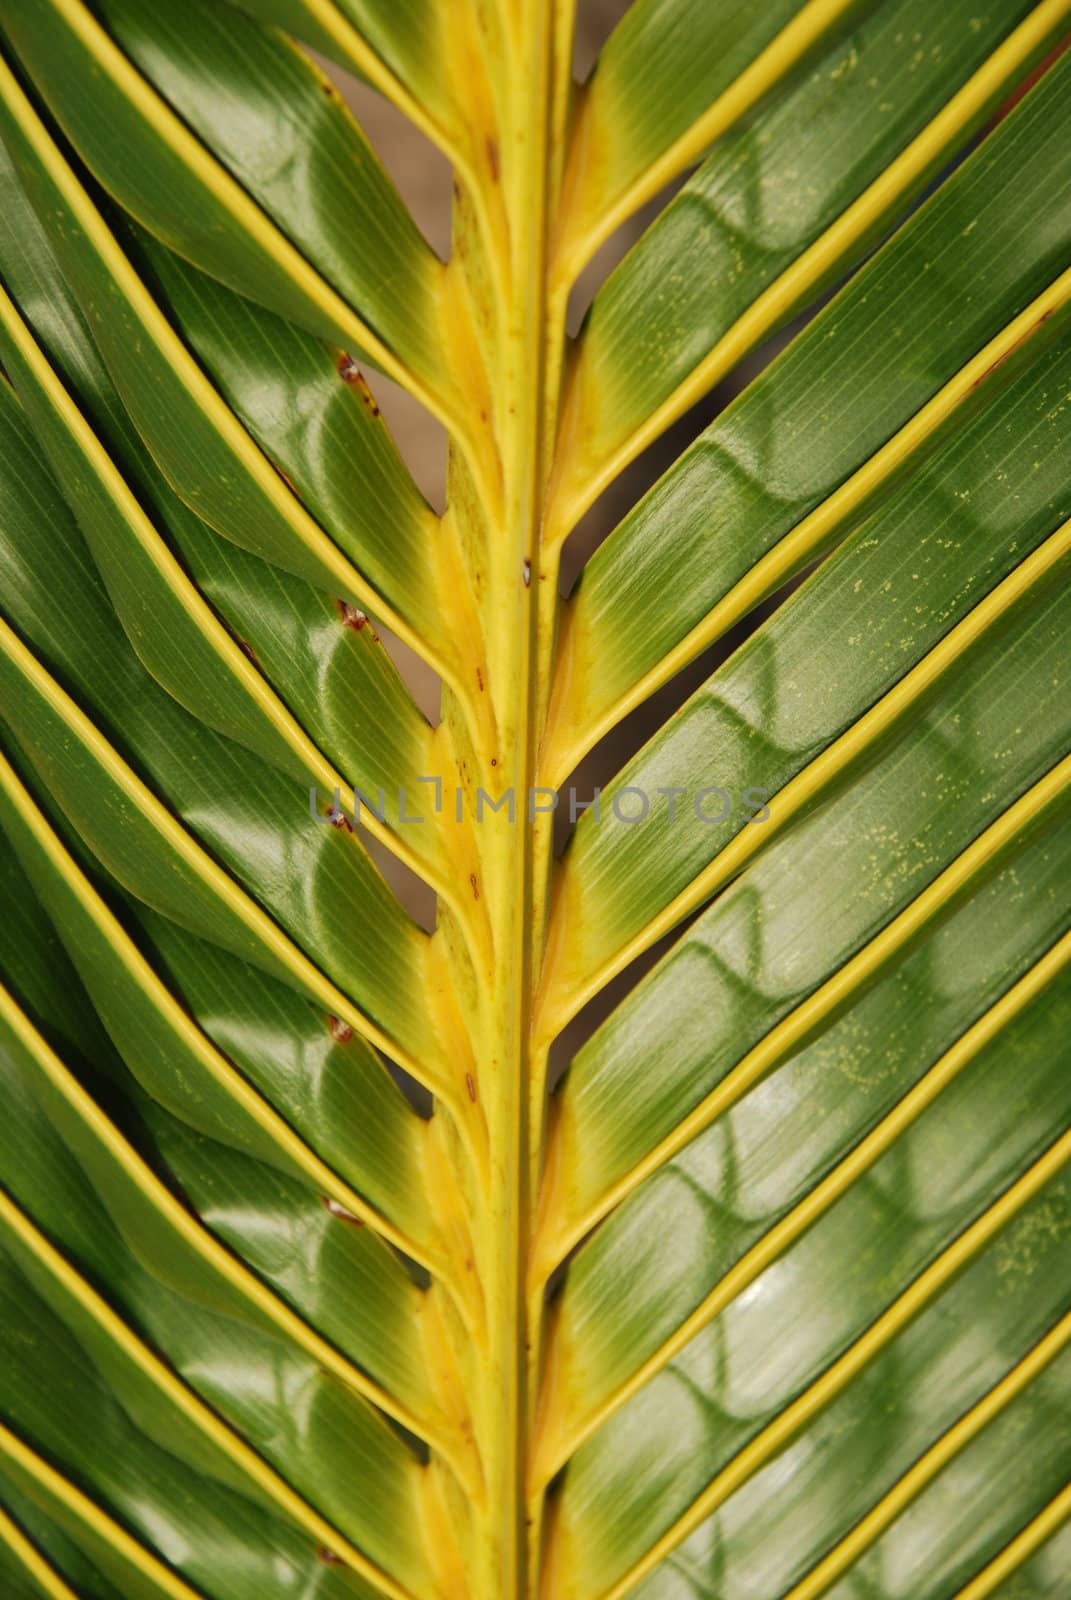 Vibrant coconut palm tree detail/background by luissantos84